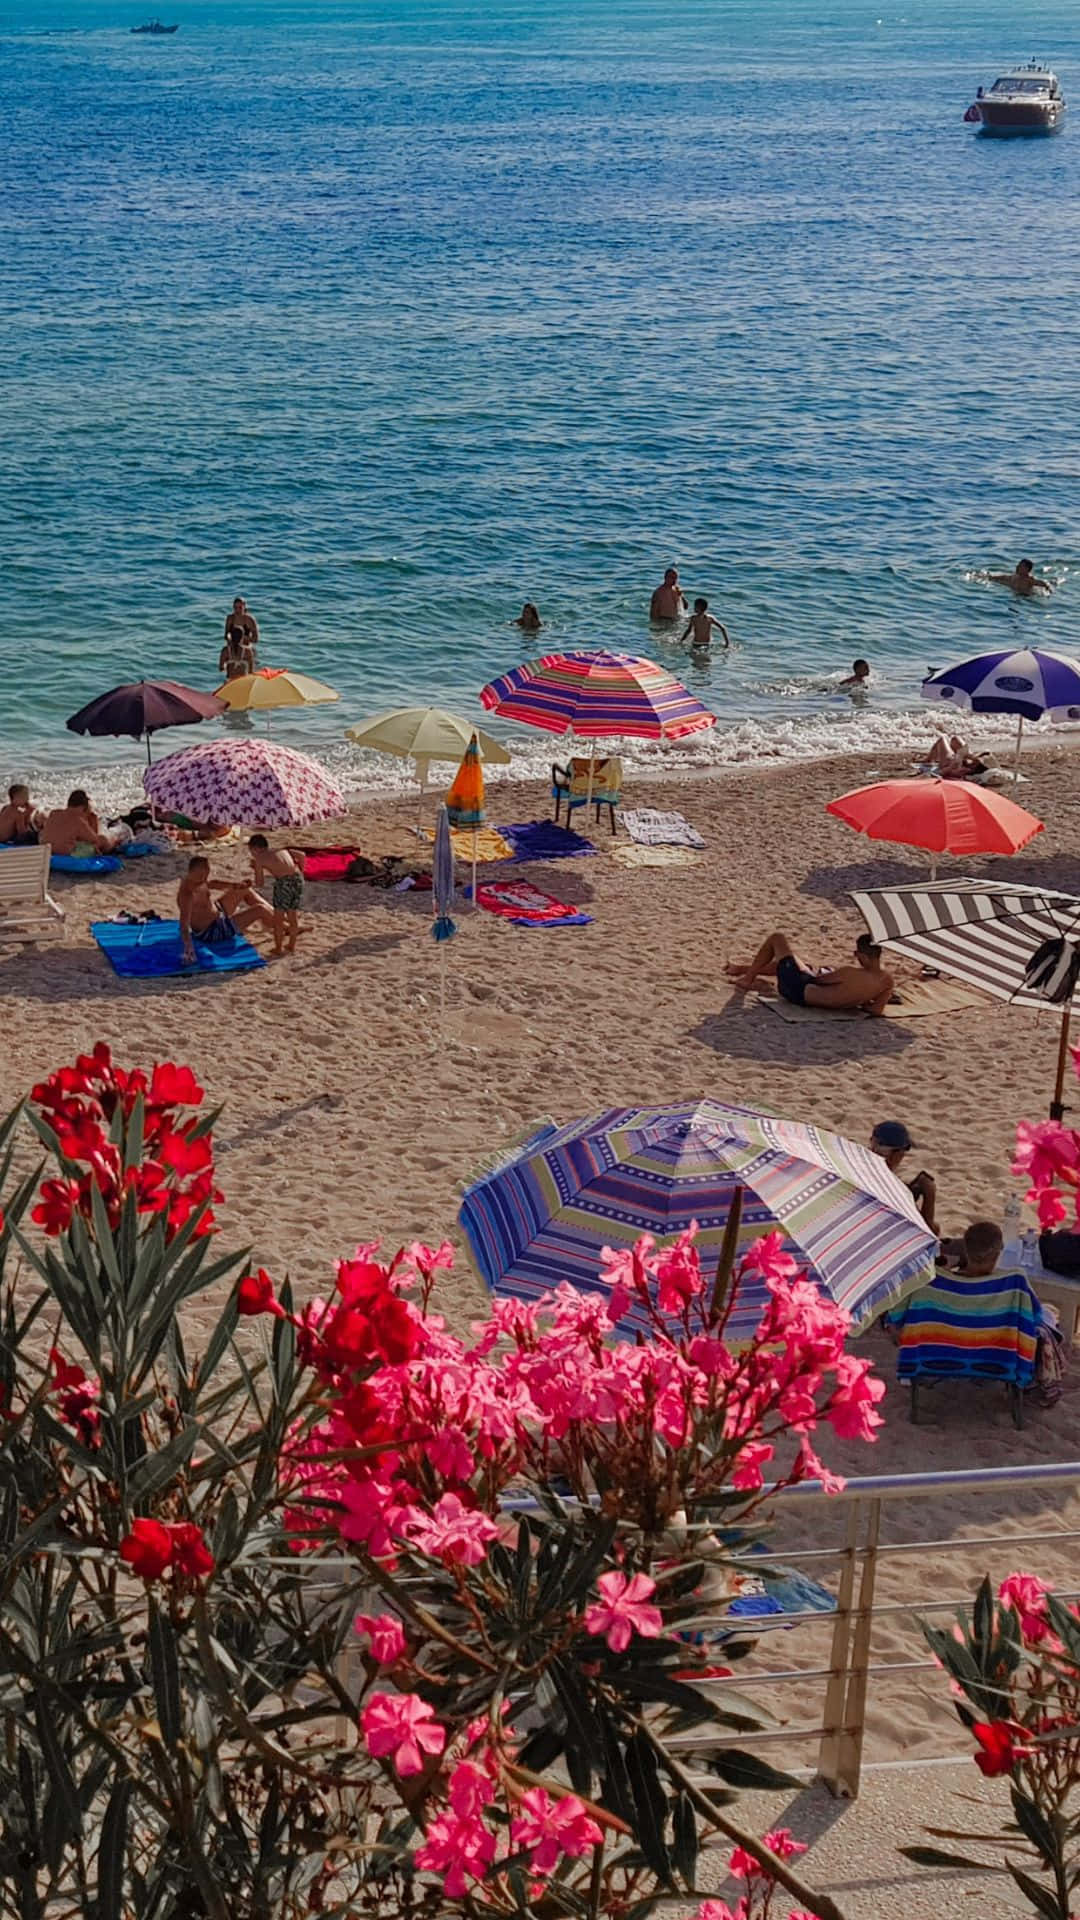 A Beach With Many Umbrellas And People